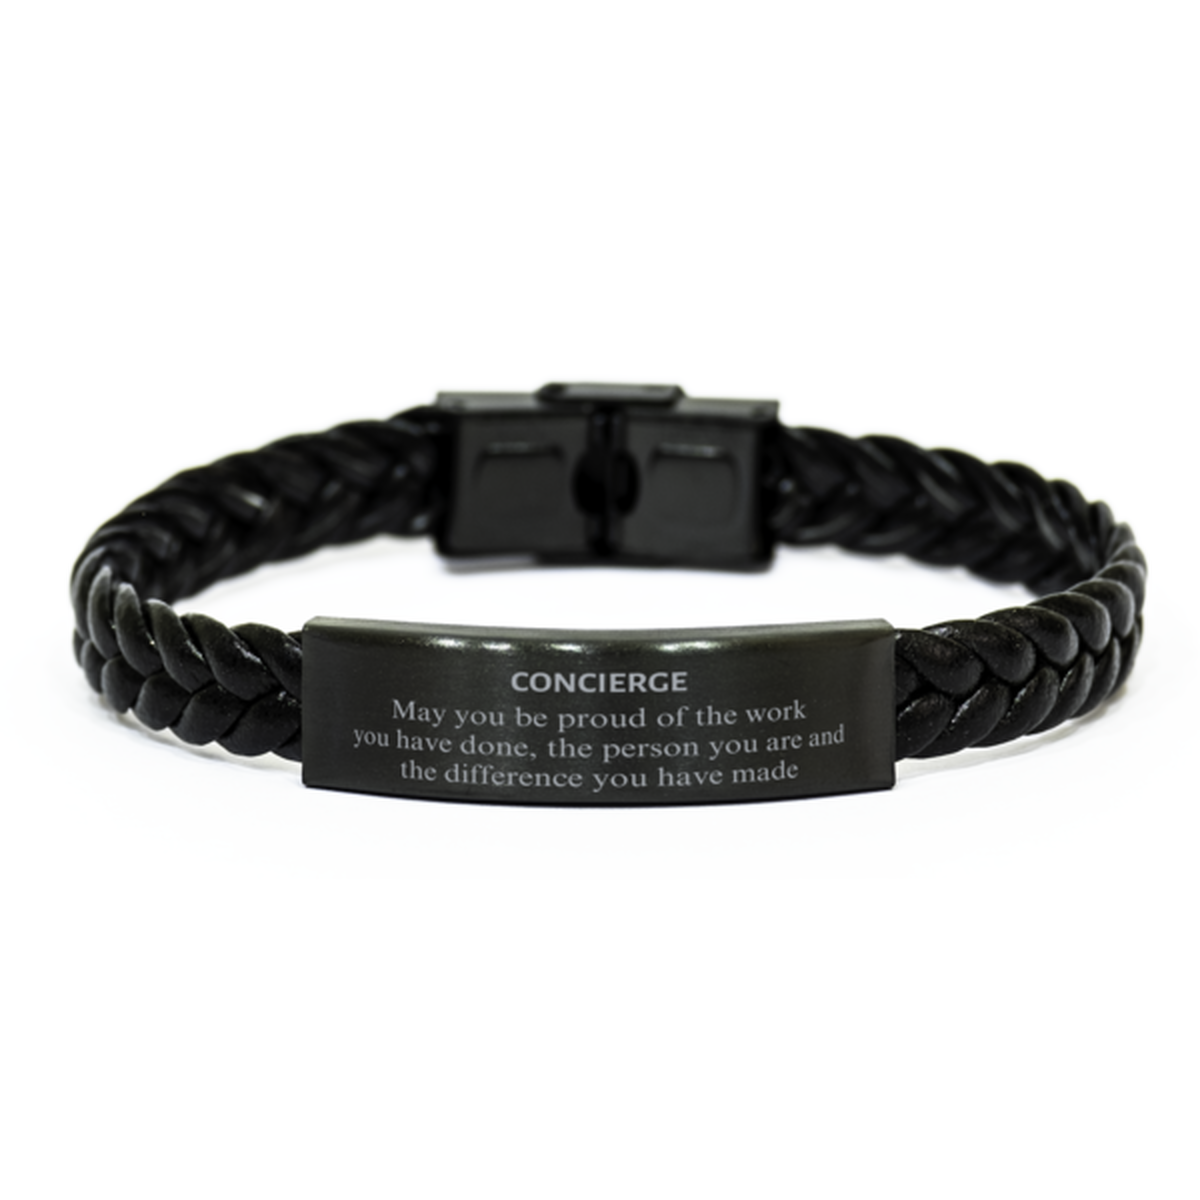 Concierge May you be proud of the work you have done, Retirement Concierge Braided Leather Bracelet for Colleague Appreciation Gifts Amazing for Concierge